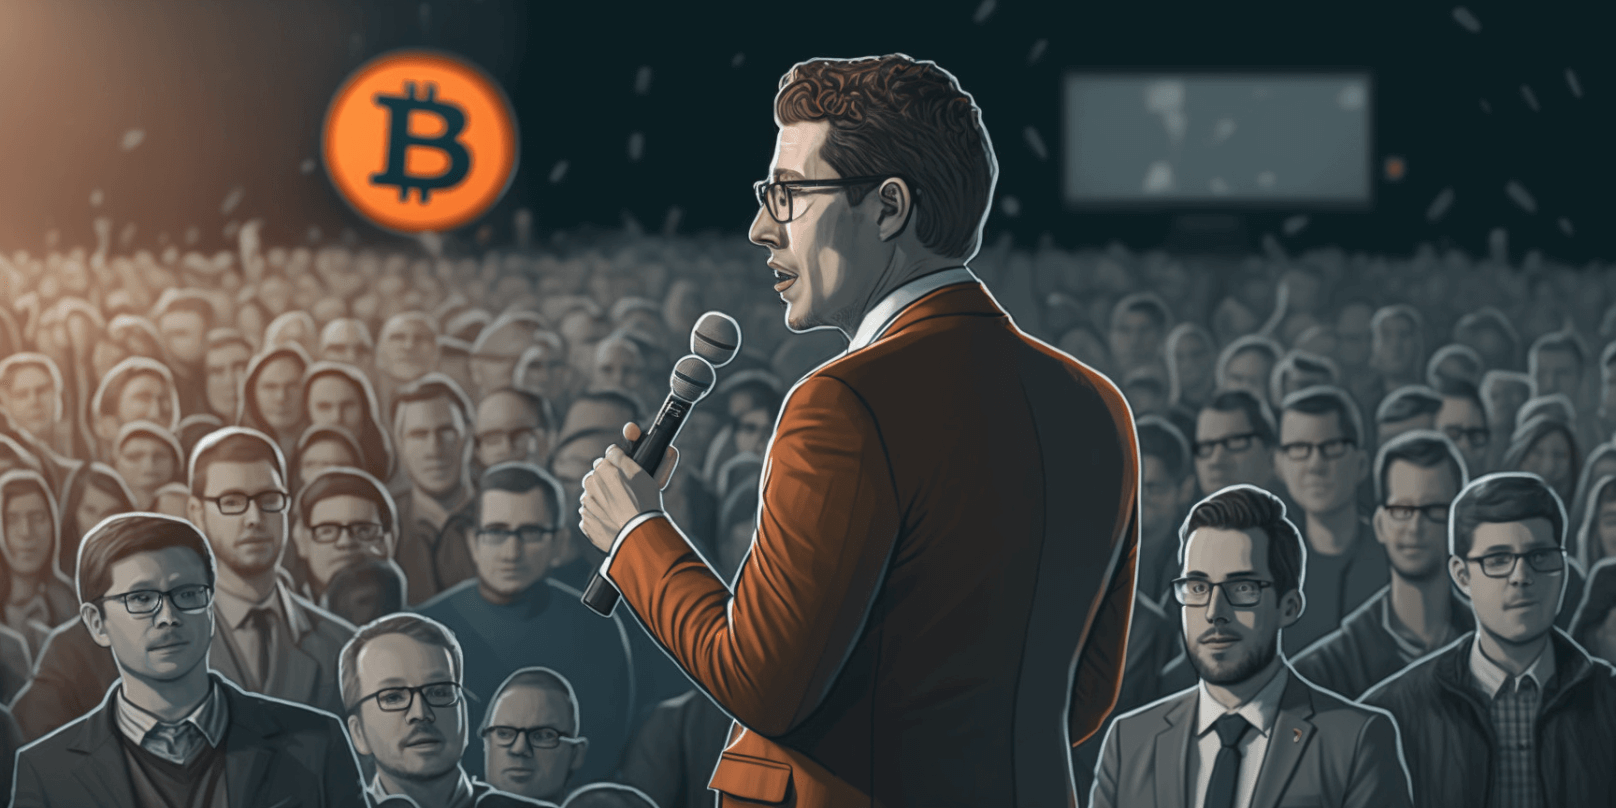 Man talking to the crowd about Bitcoin, art generated by Midjourney